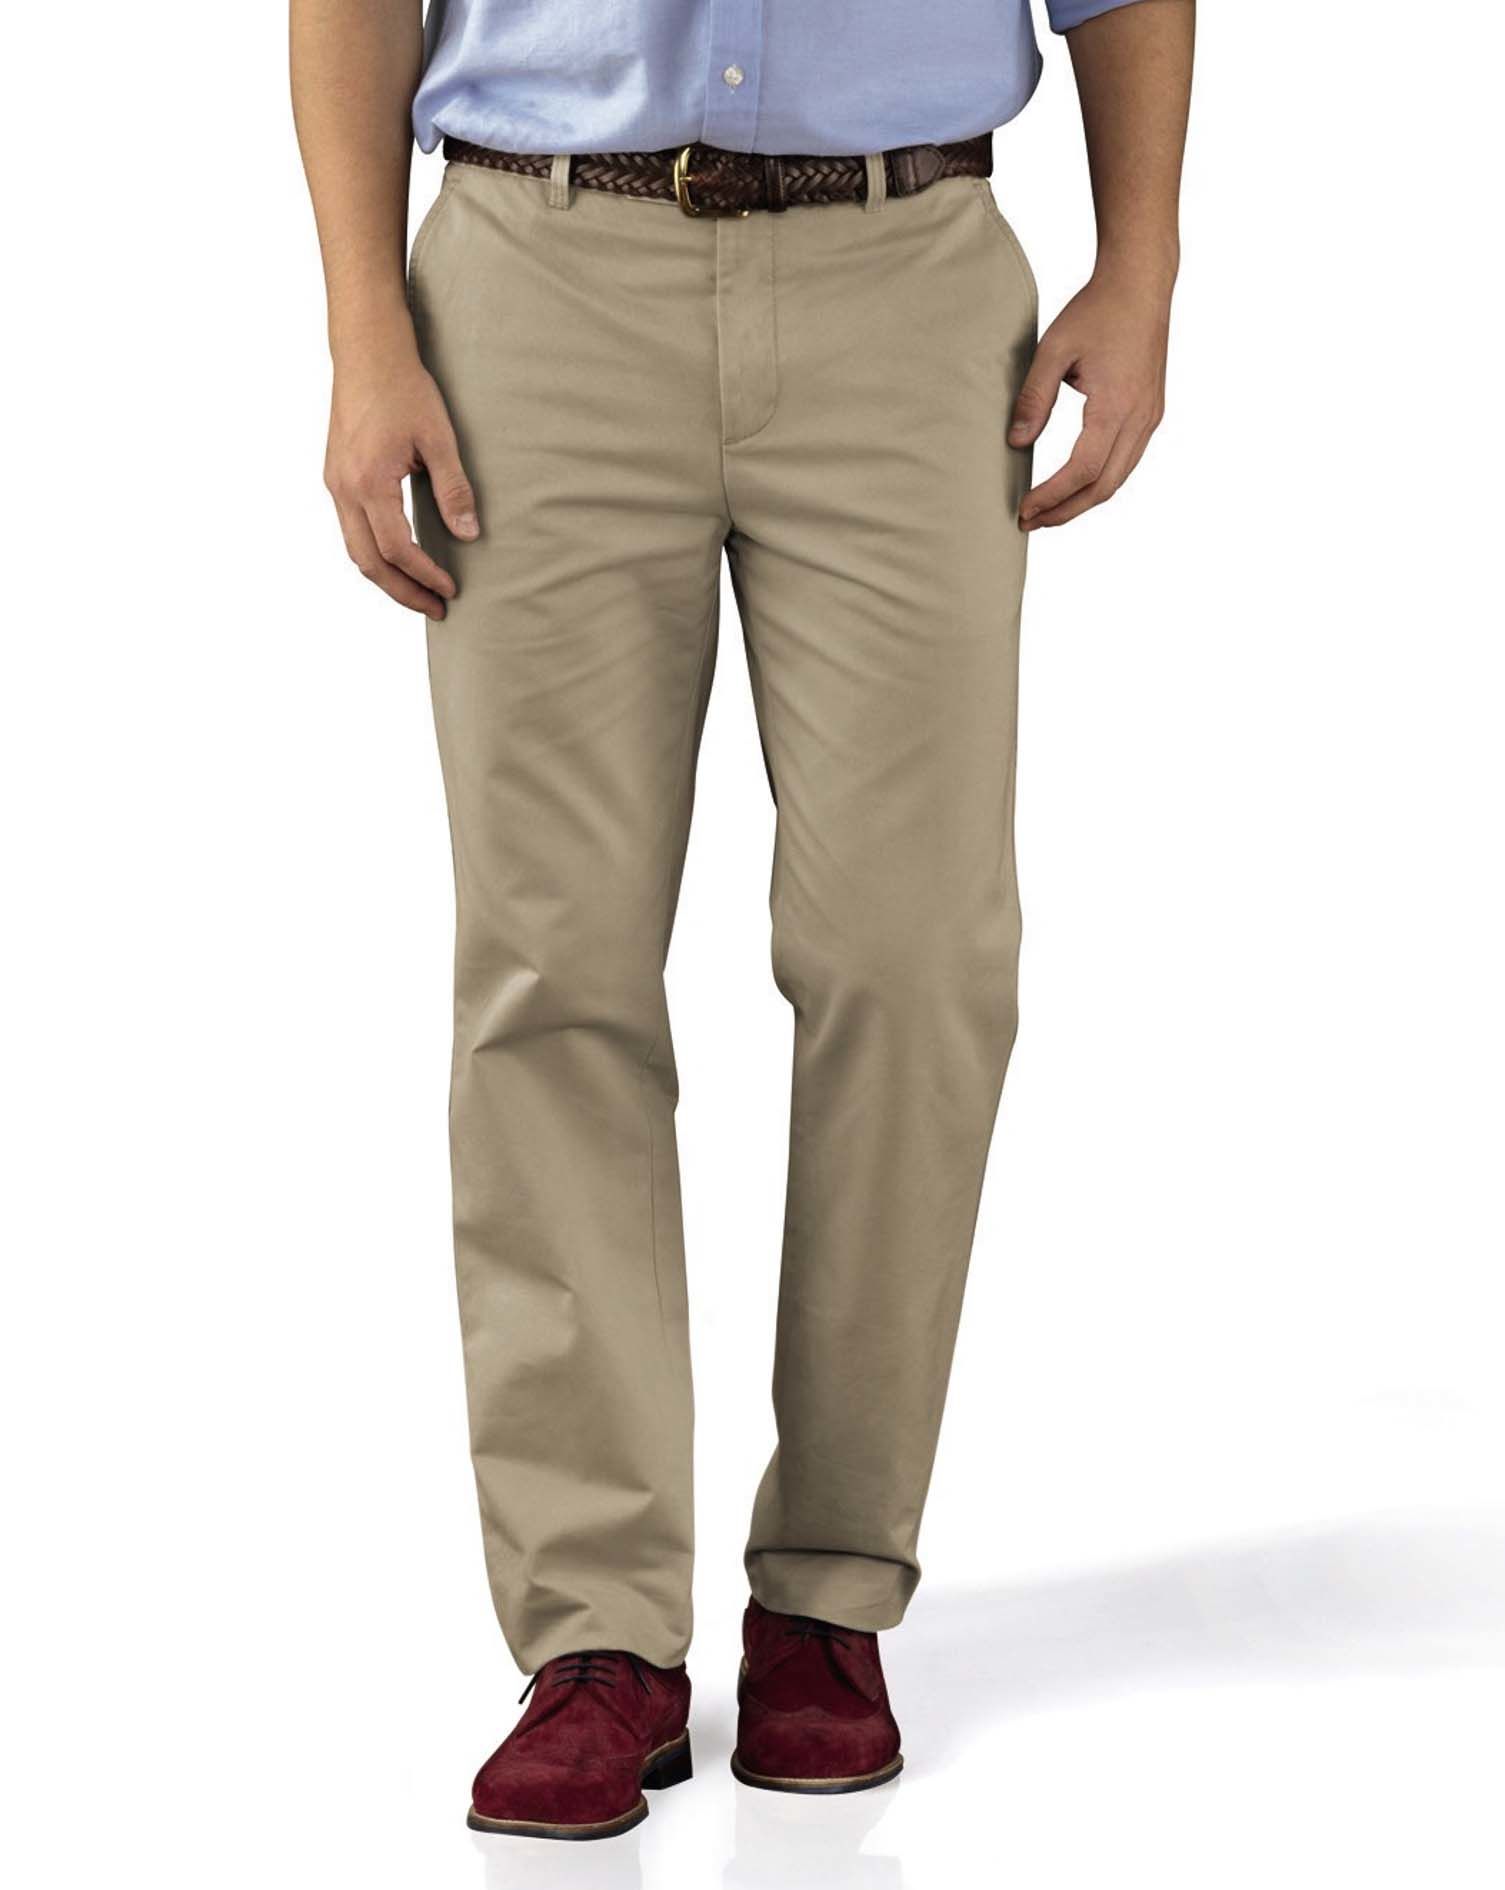 Get stylish and attractive Chinos
for  trendiest fashion